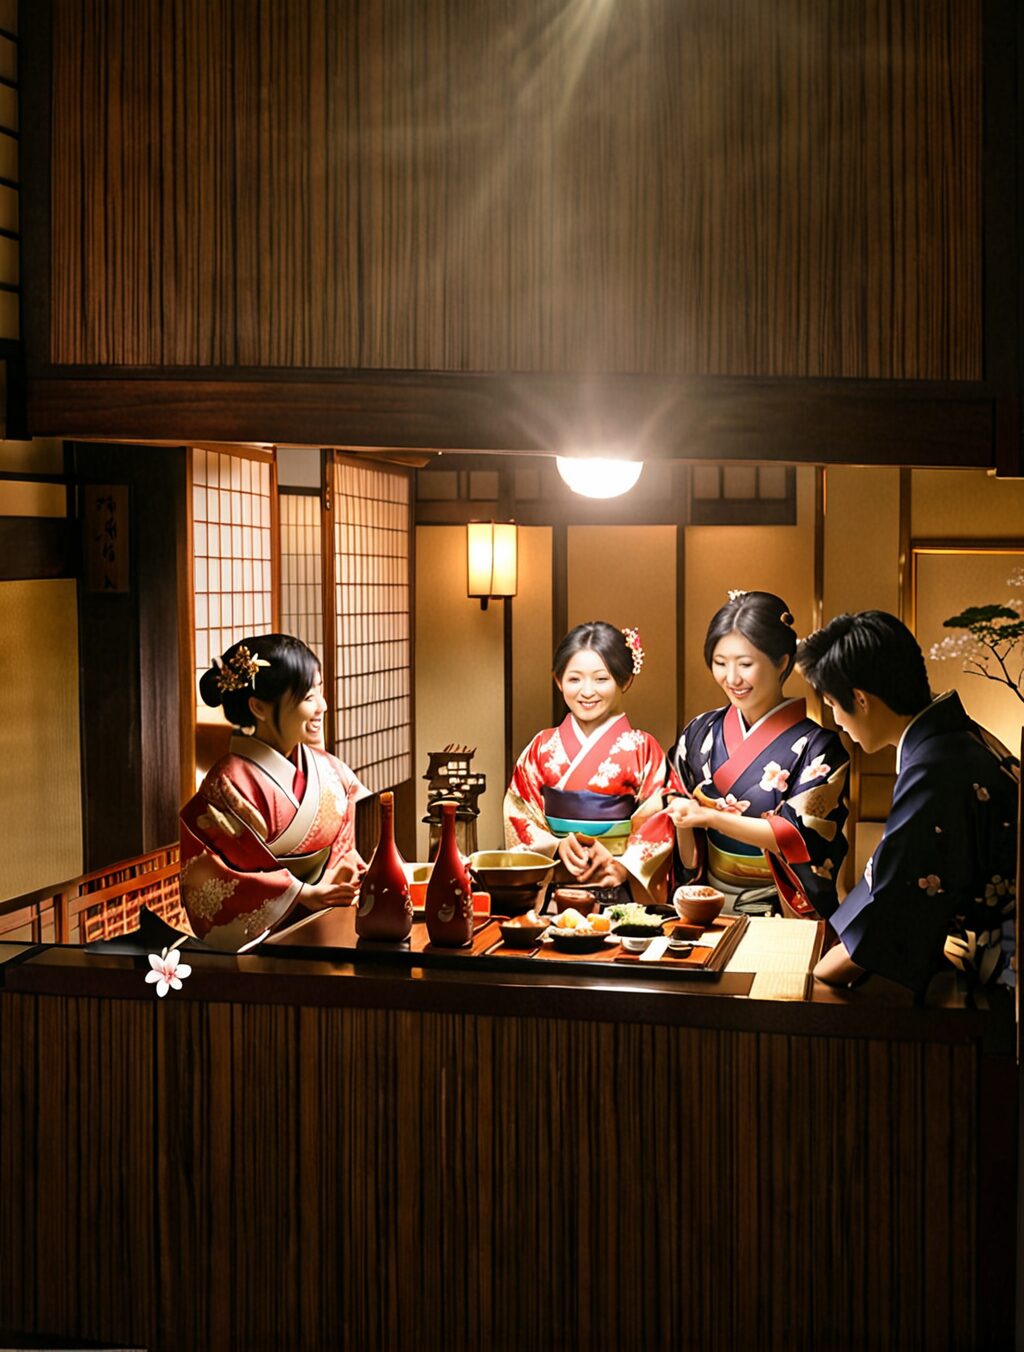 family travel packages to japan